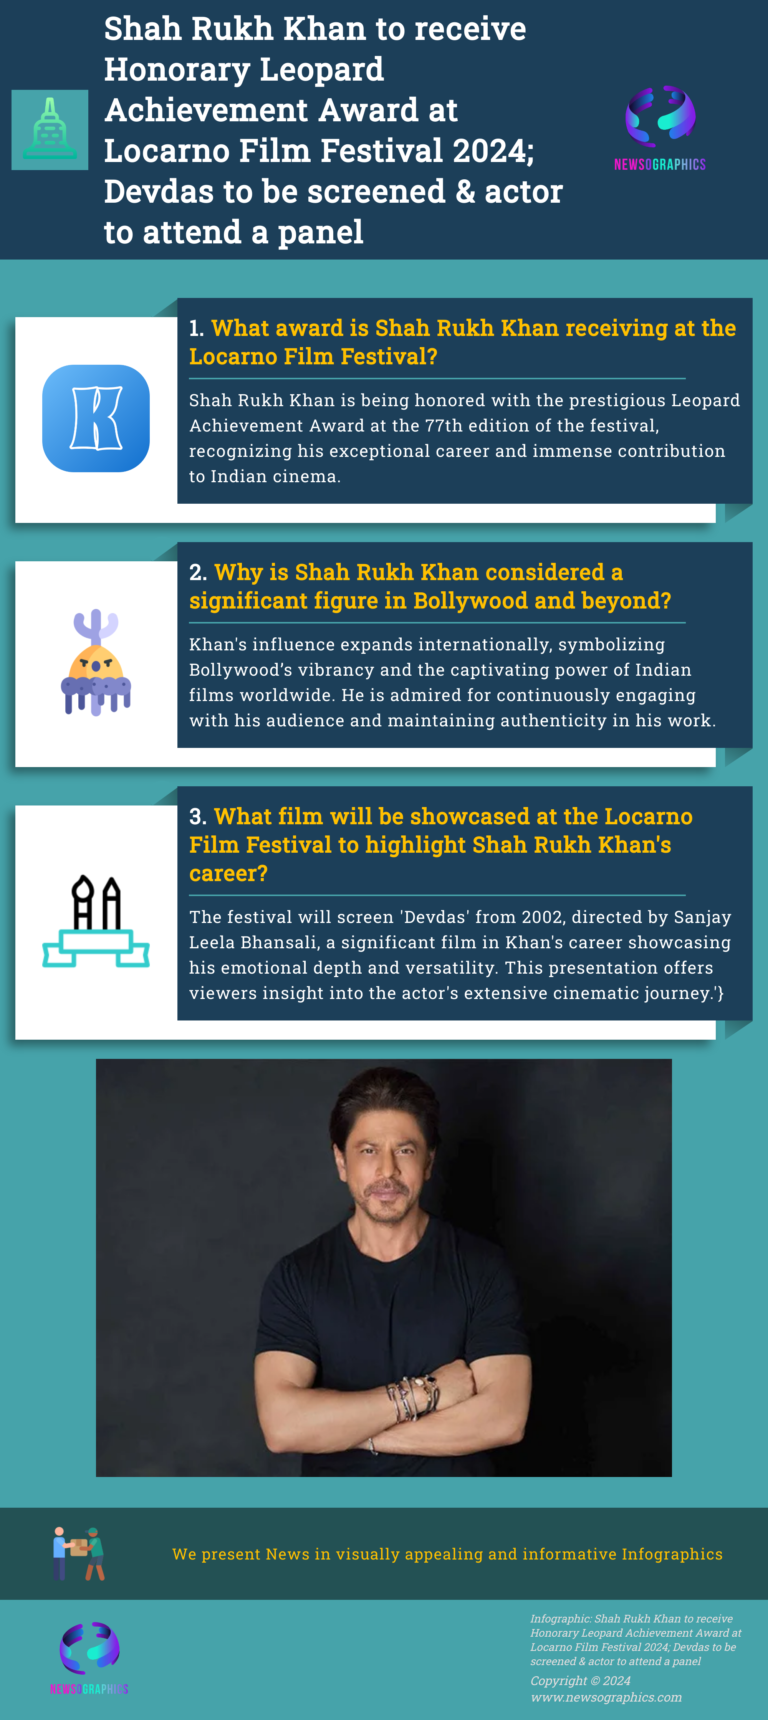 Shah Rukh Khan to receive Honorary Leopard Achievement Award at Locarno Film Festival 2024; Devdas to be screened & actor to attend a panel